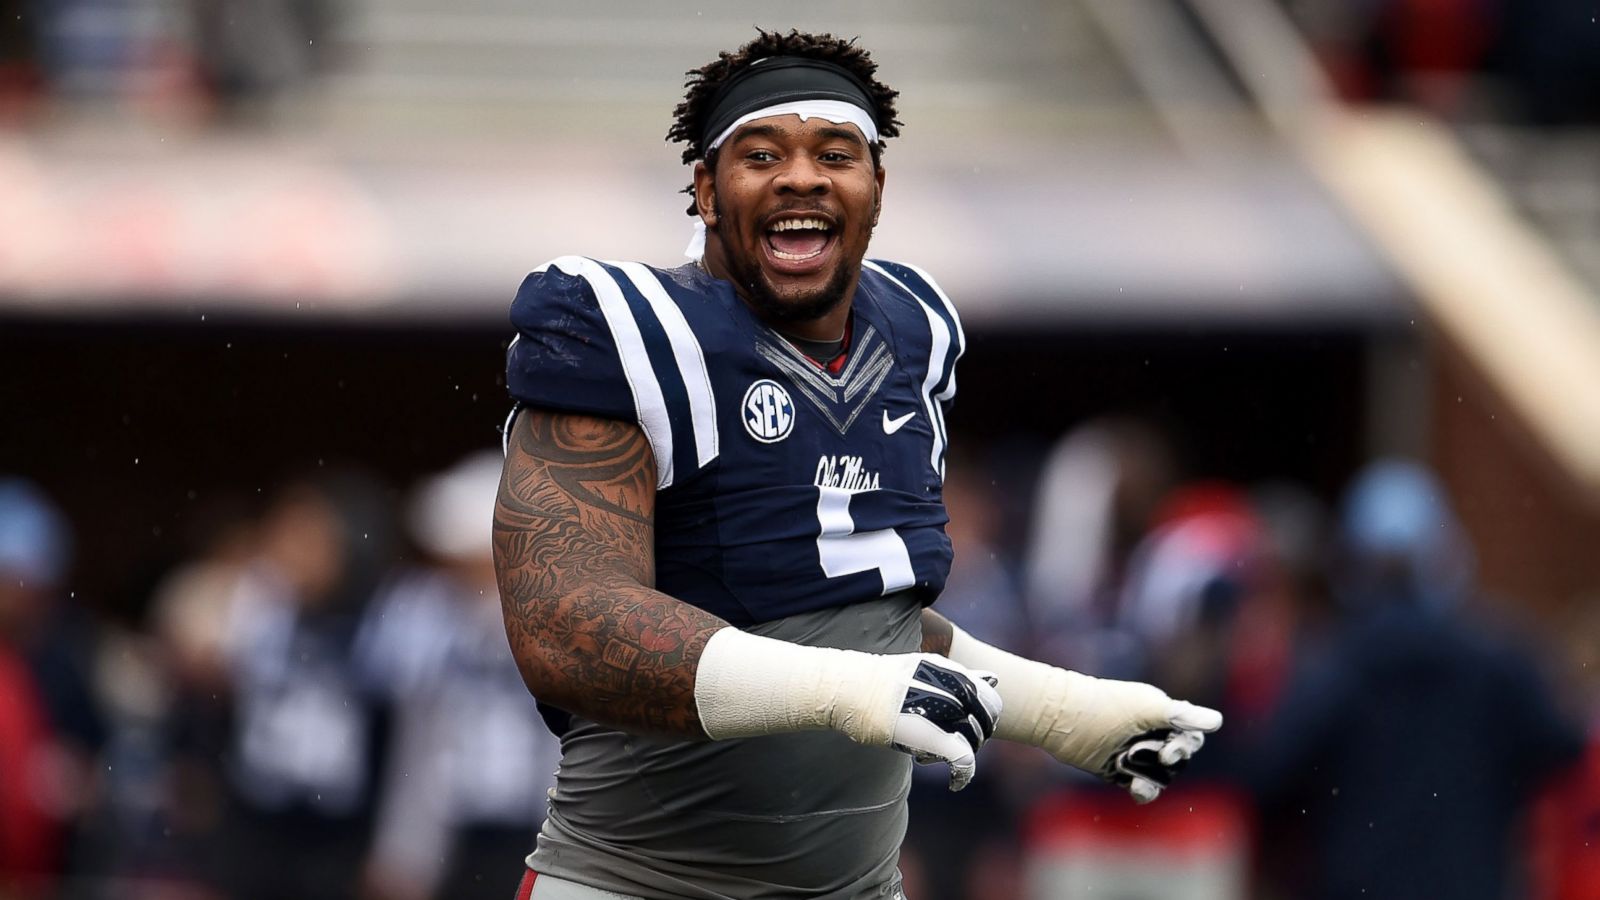 NFL Prospect Robert Nkemdiche Injured in Fall From Hotel - ABC News